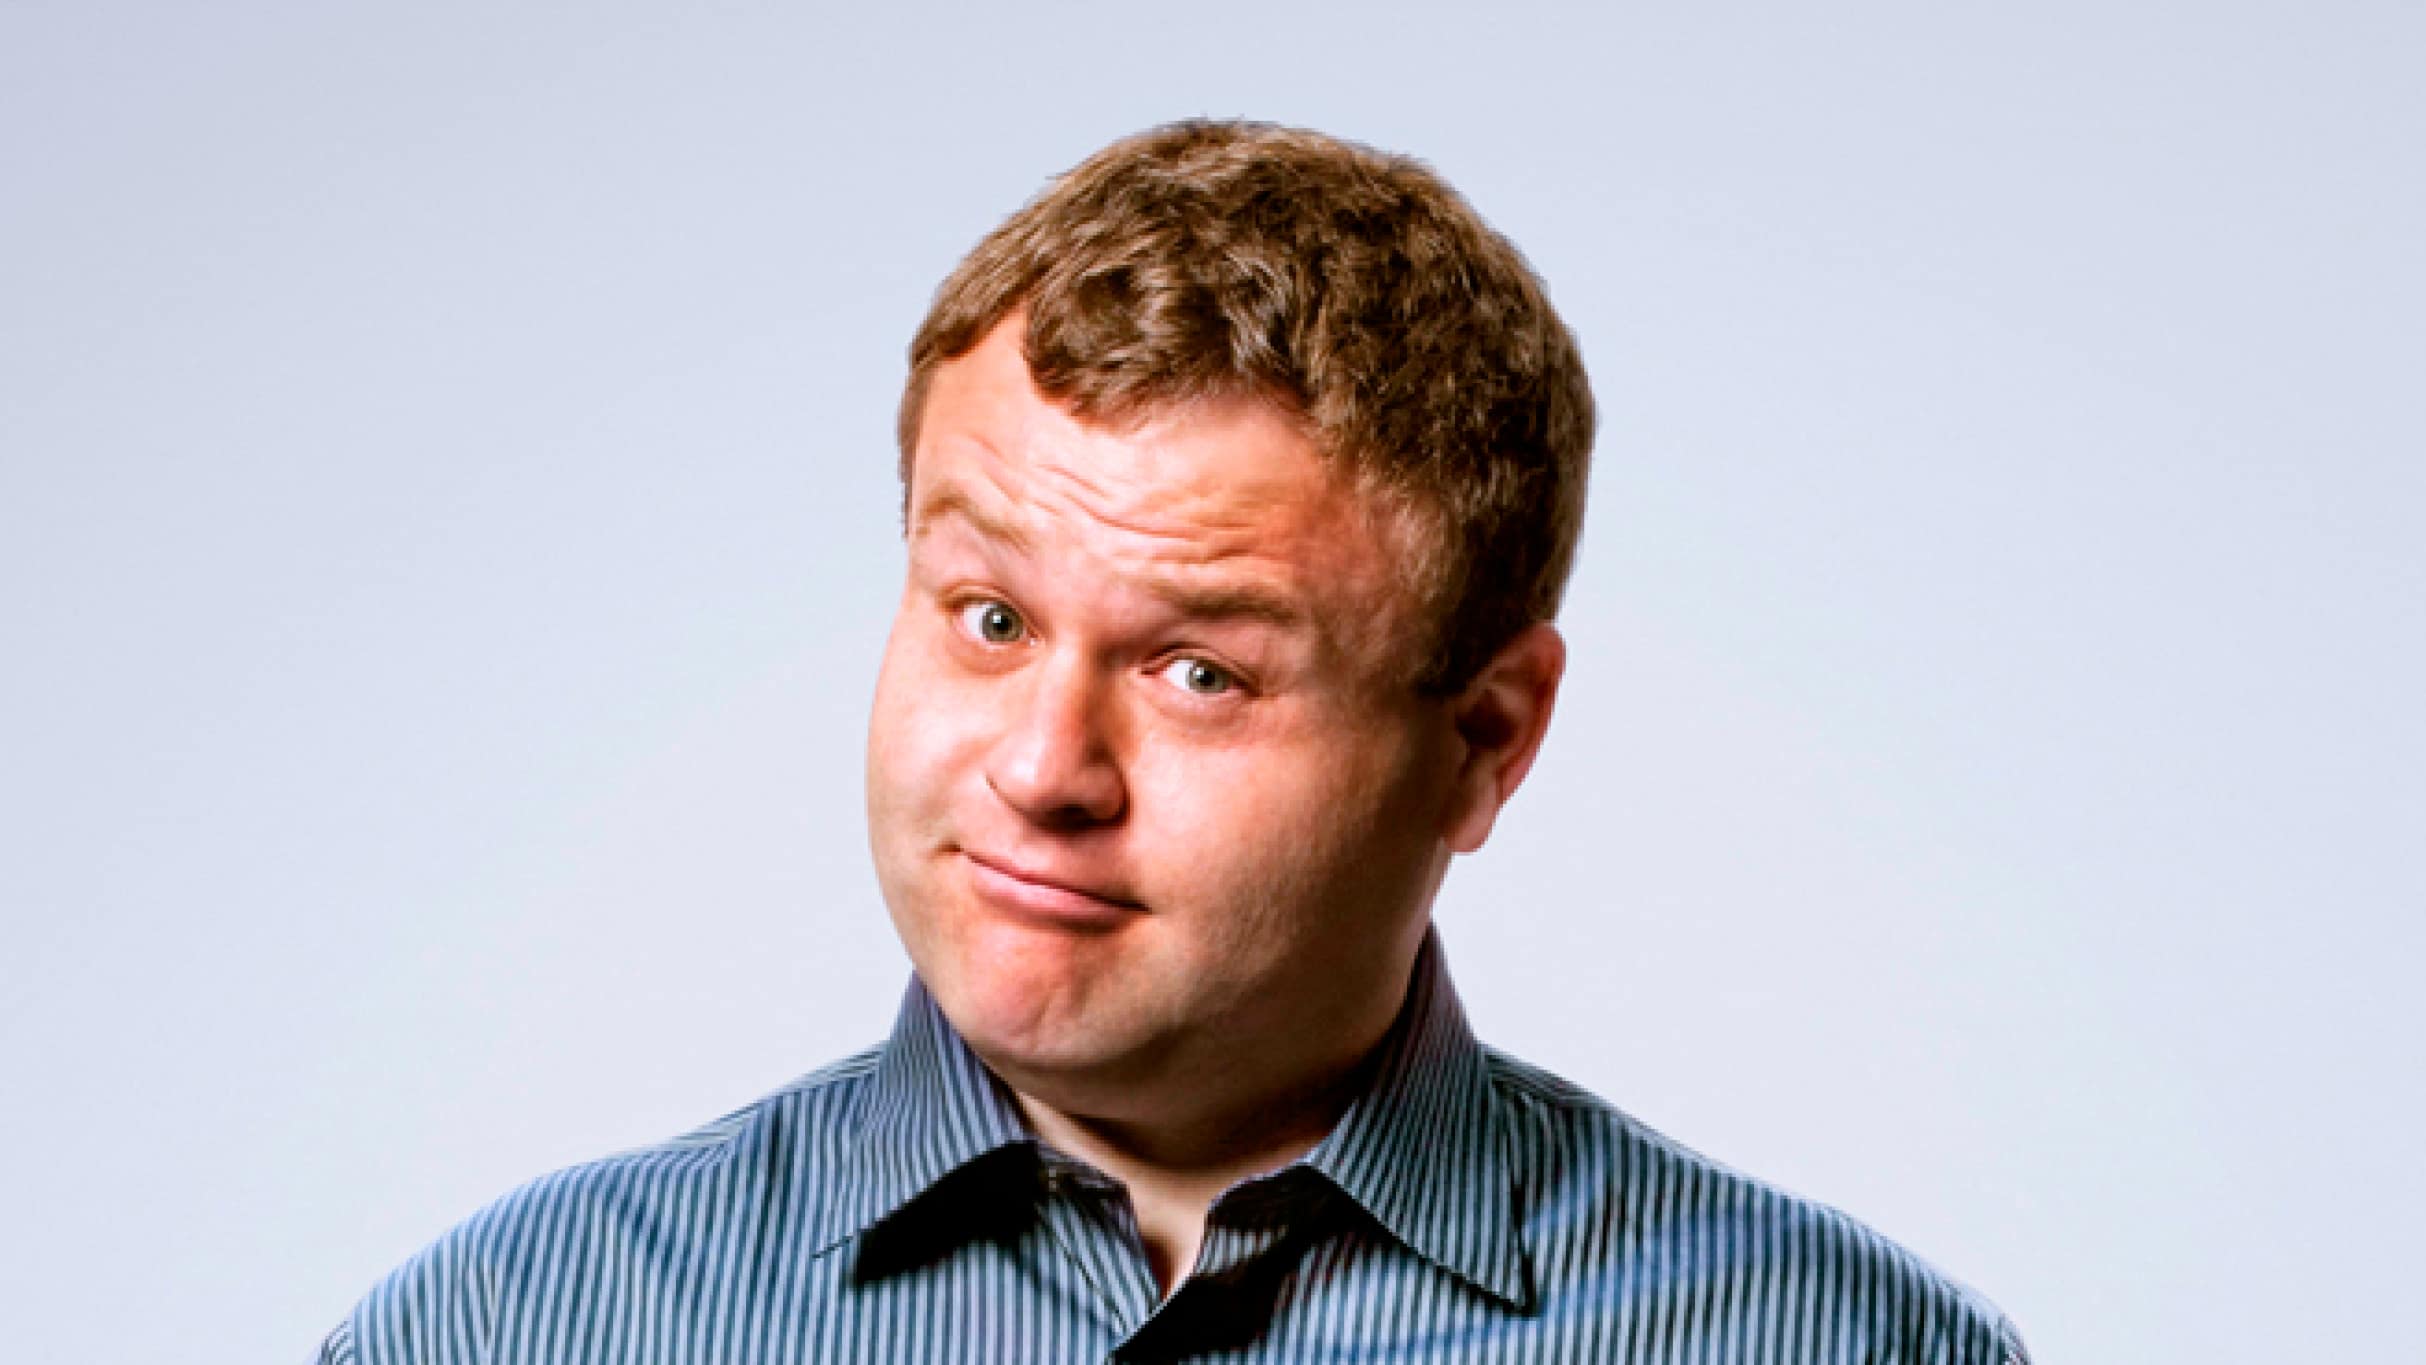 members only presale password to Frank Caliendo wsg Rick Mahorn sponsored by OSEF advanced tickets in Detroit